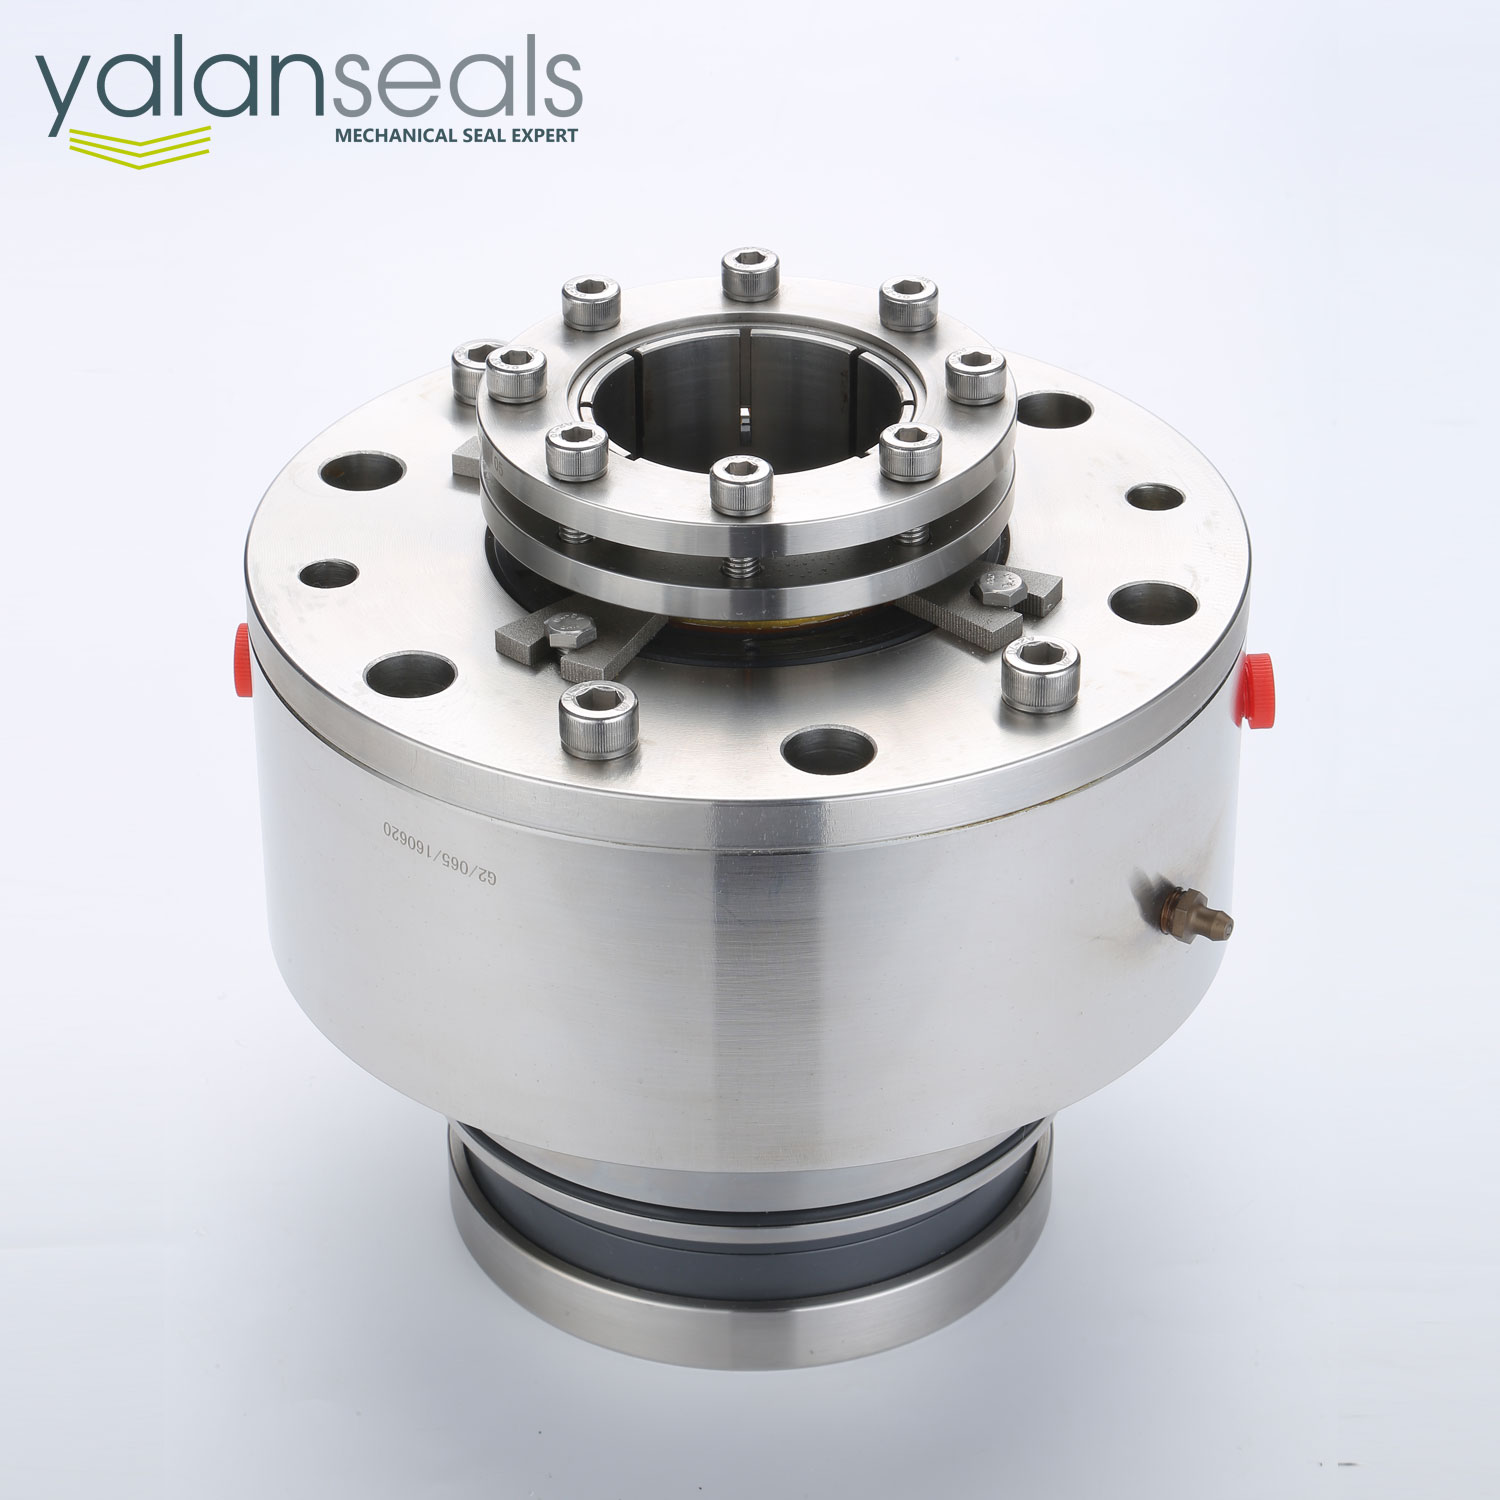 YALAN Type 261 Cartridge Seals for Slurry Pumps and Side Entry Mixers